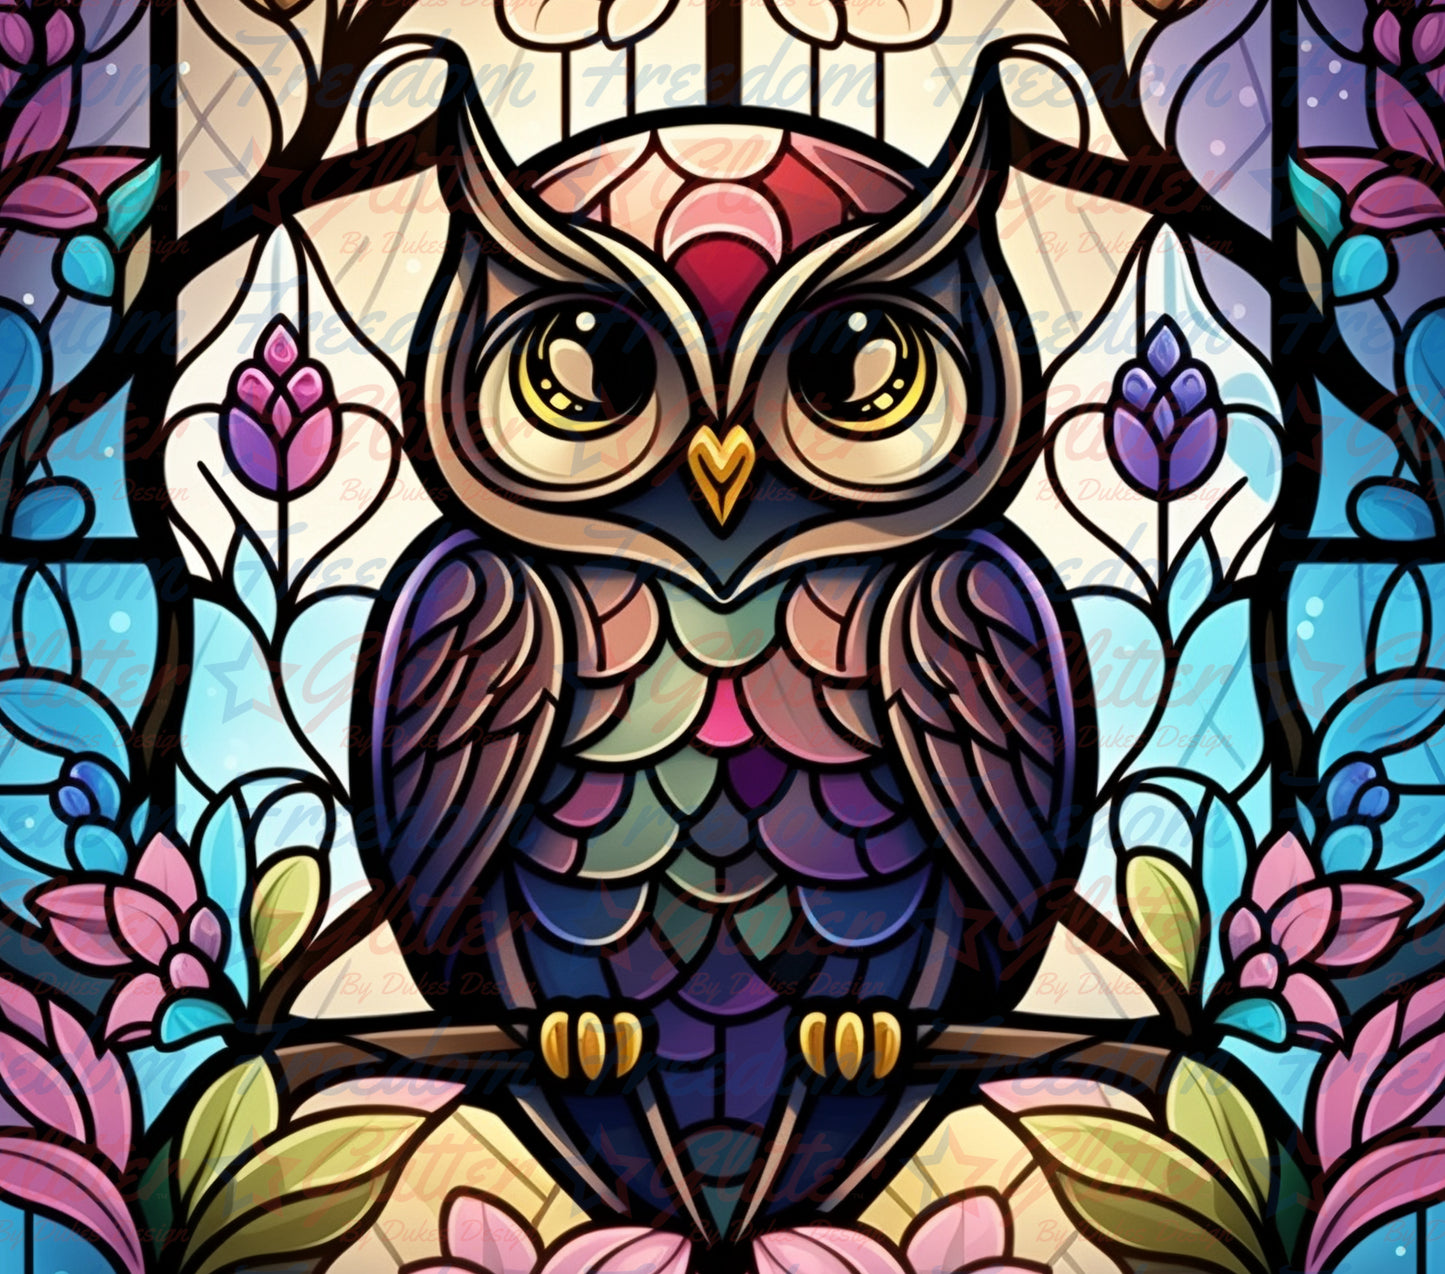 Stained Glass Owl 6 (Sublimation)